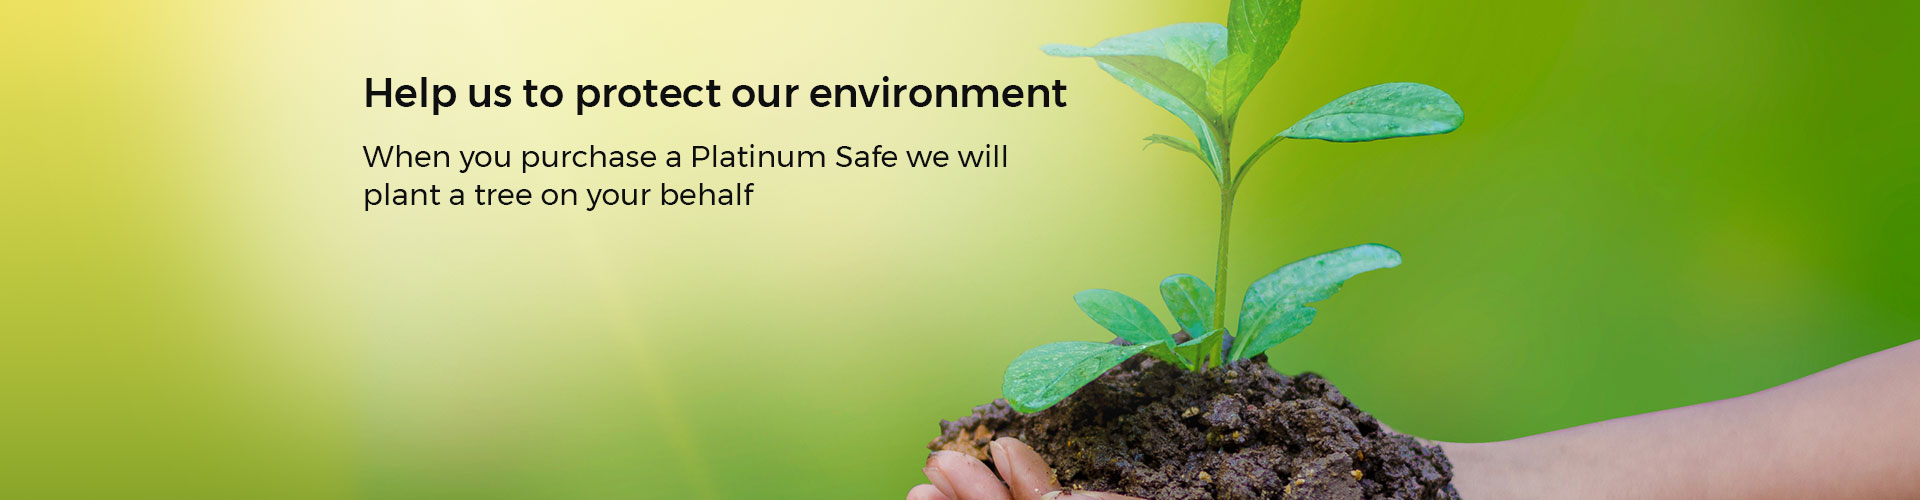 Help us protect the environment. When you purchase a Platinum Safe we will plant a tree on your behalf